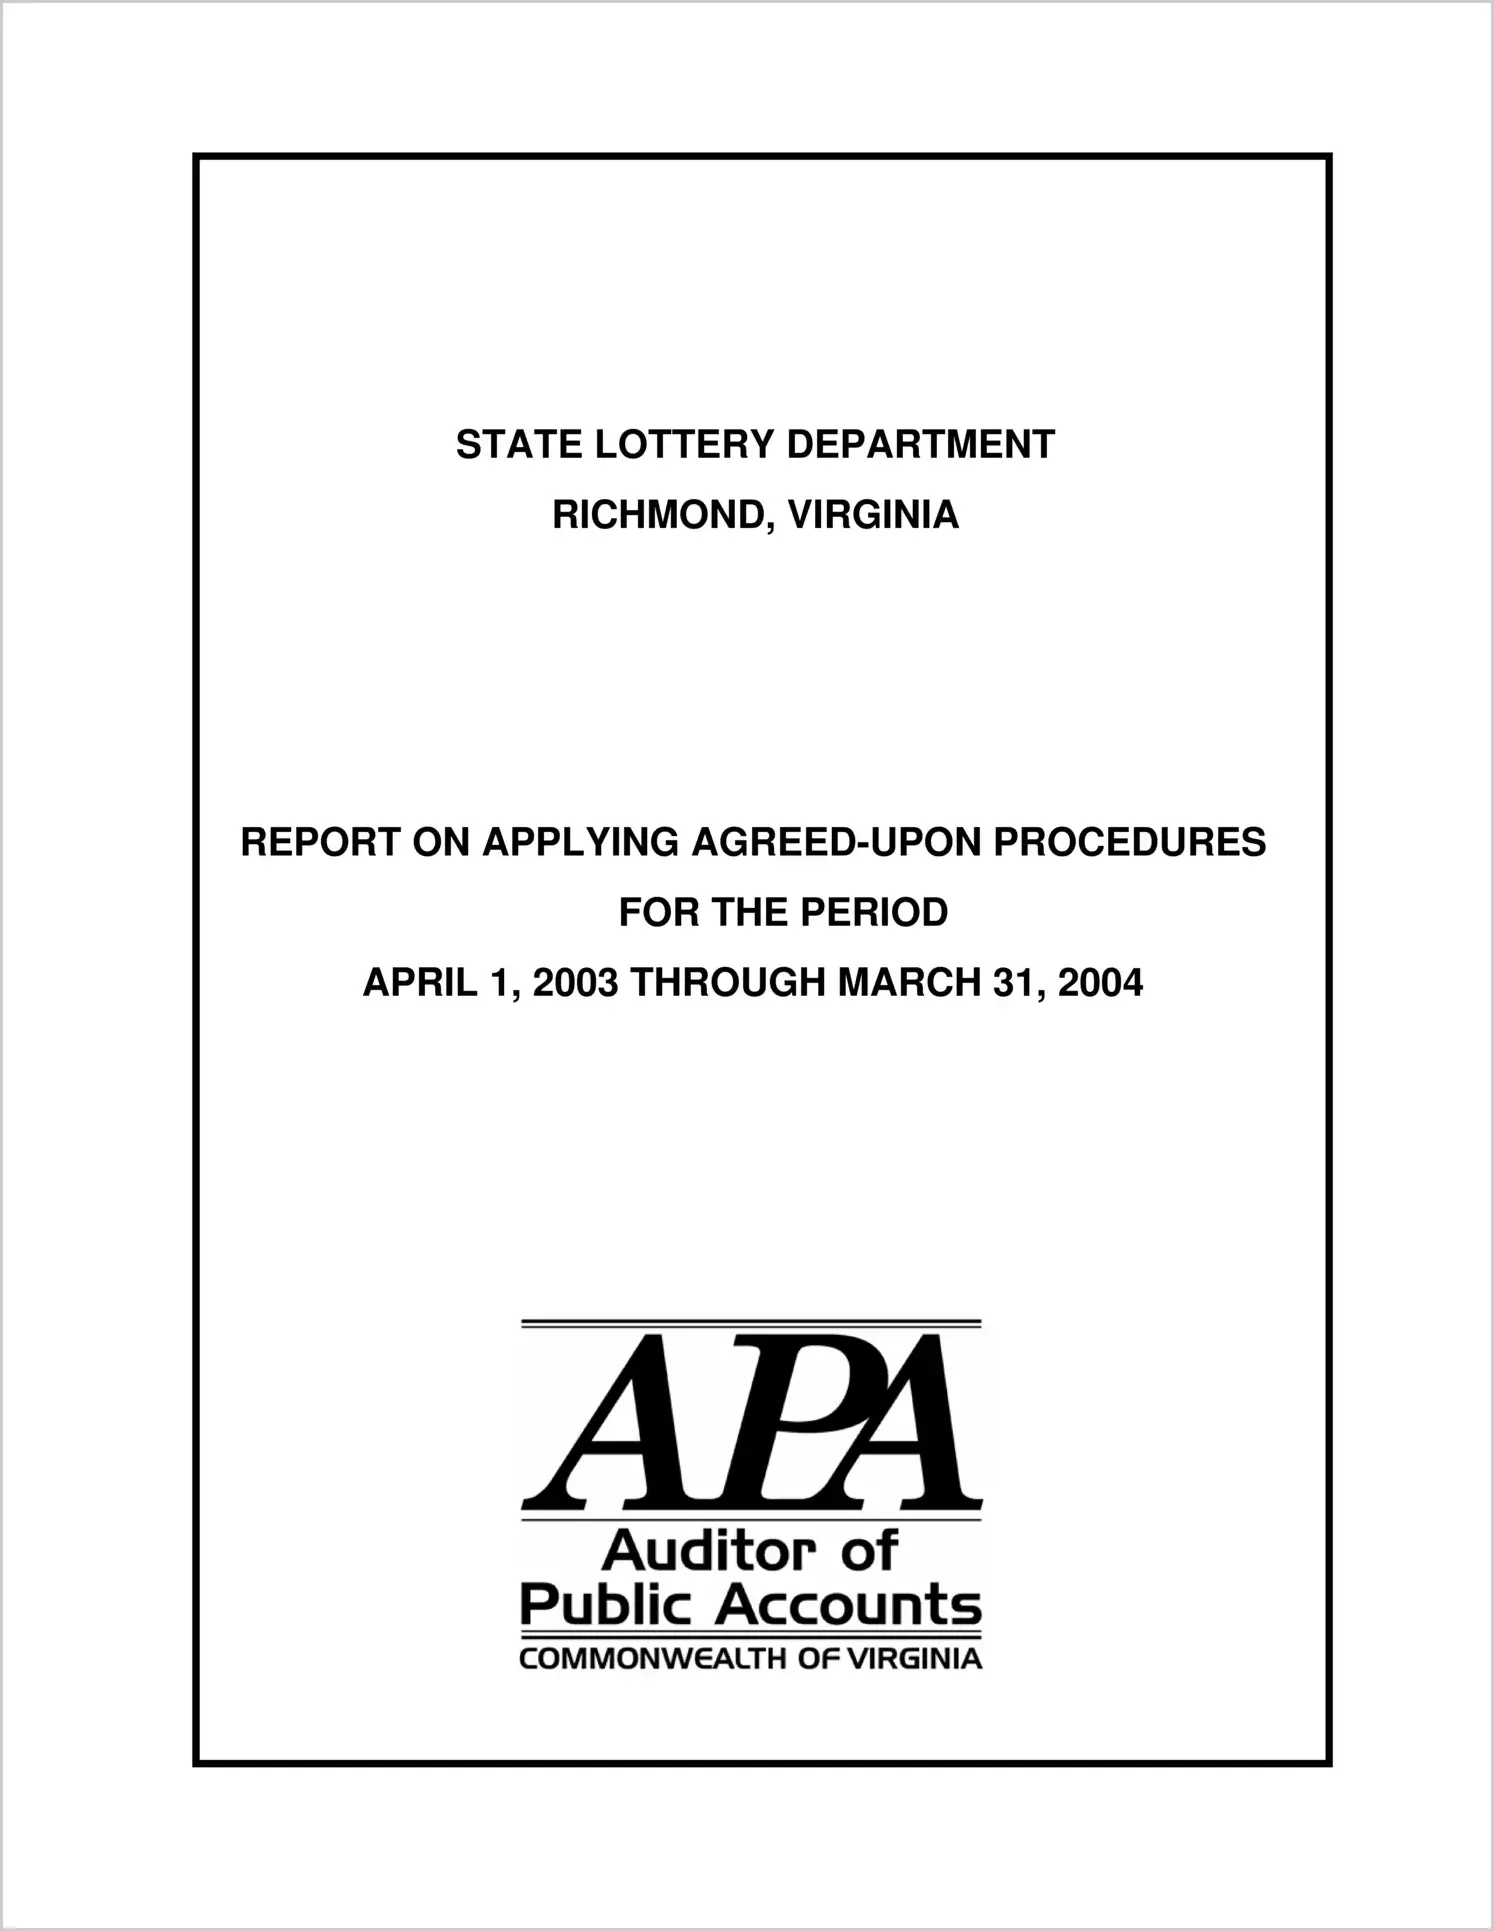 Special ReportState Lottery Department Report on Applying Agreed-Upon Procedures (Lotto South)(Report Period: 4/1/2003 - 3/31/2004)